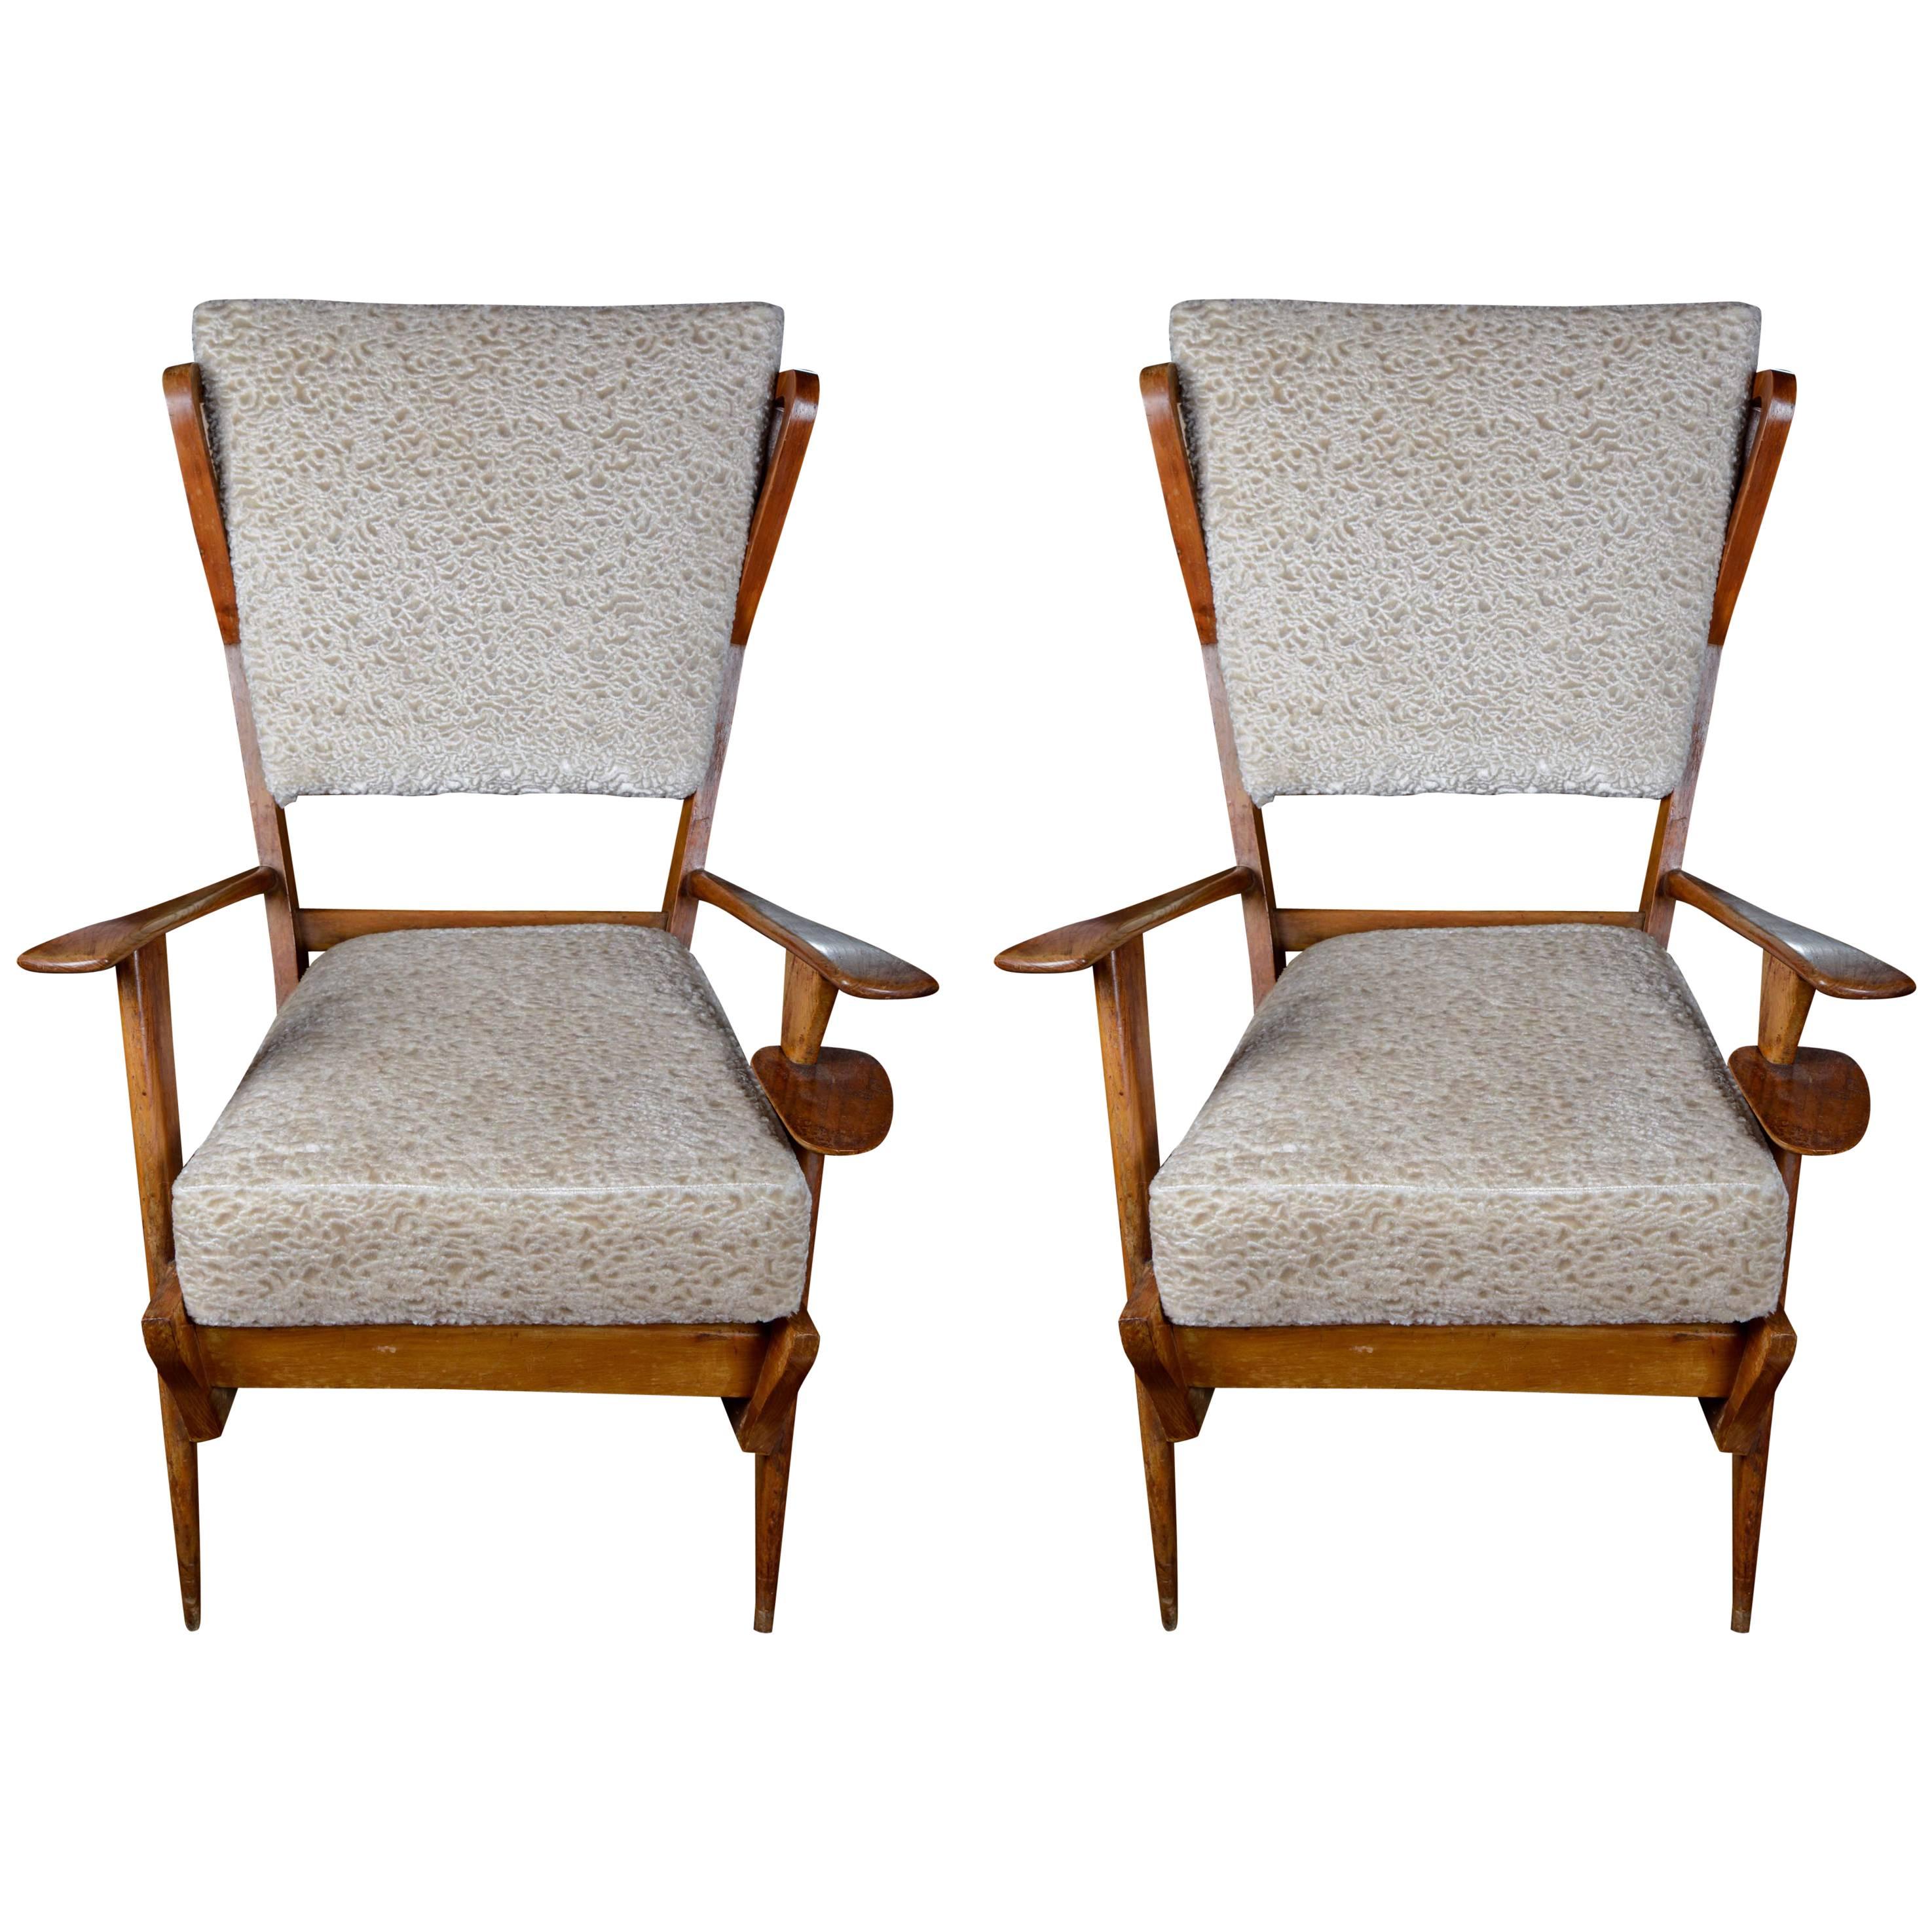 Pair of Italian vintage armchairs at cost price.